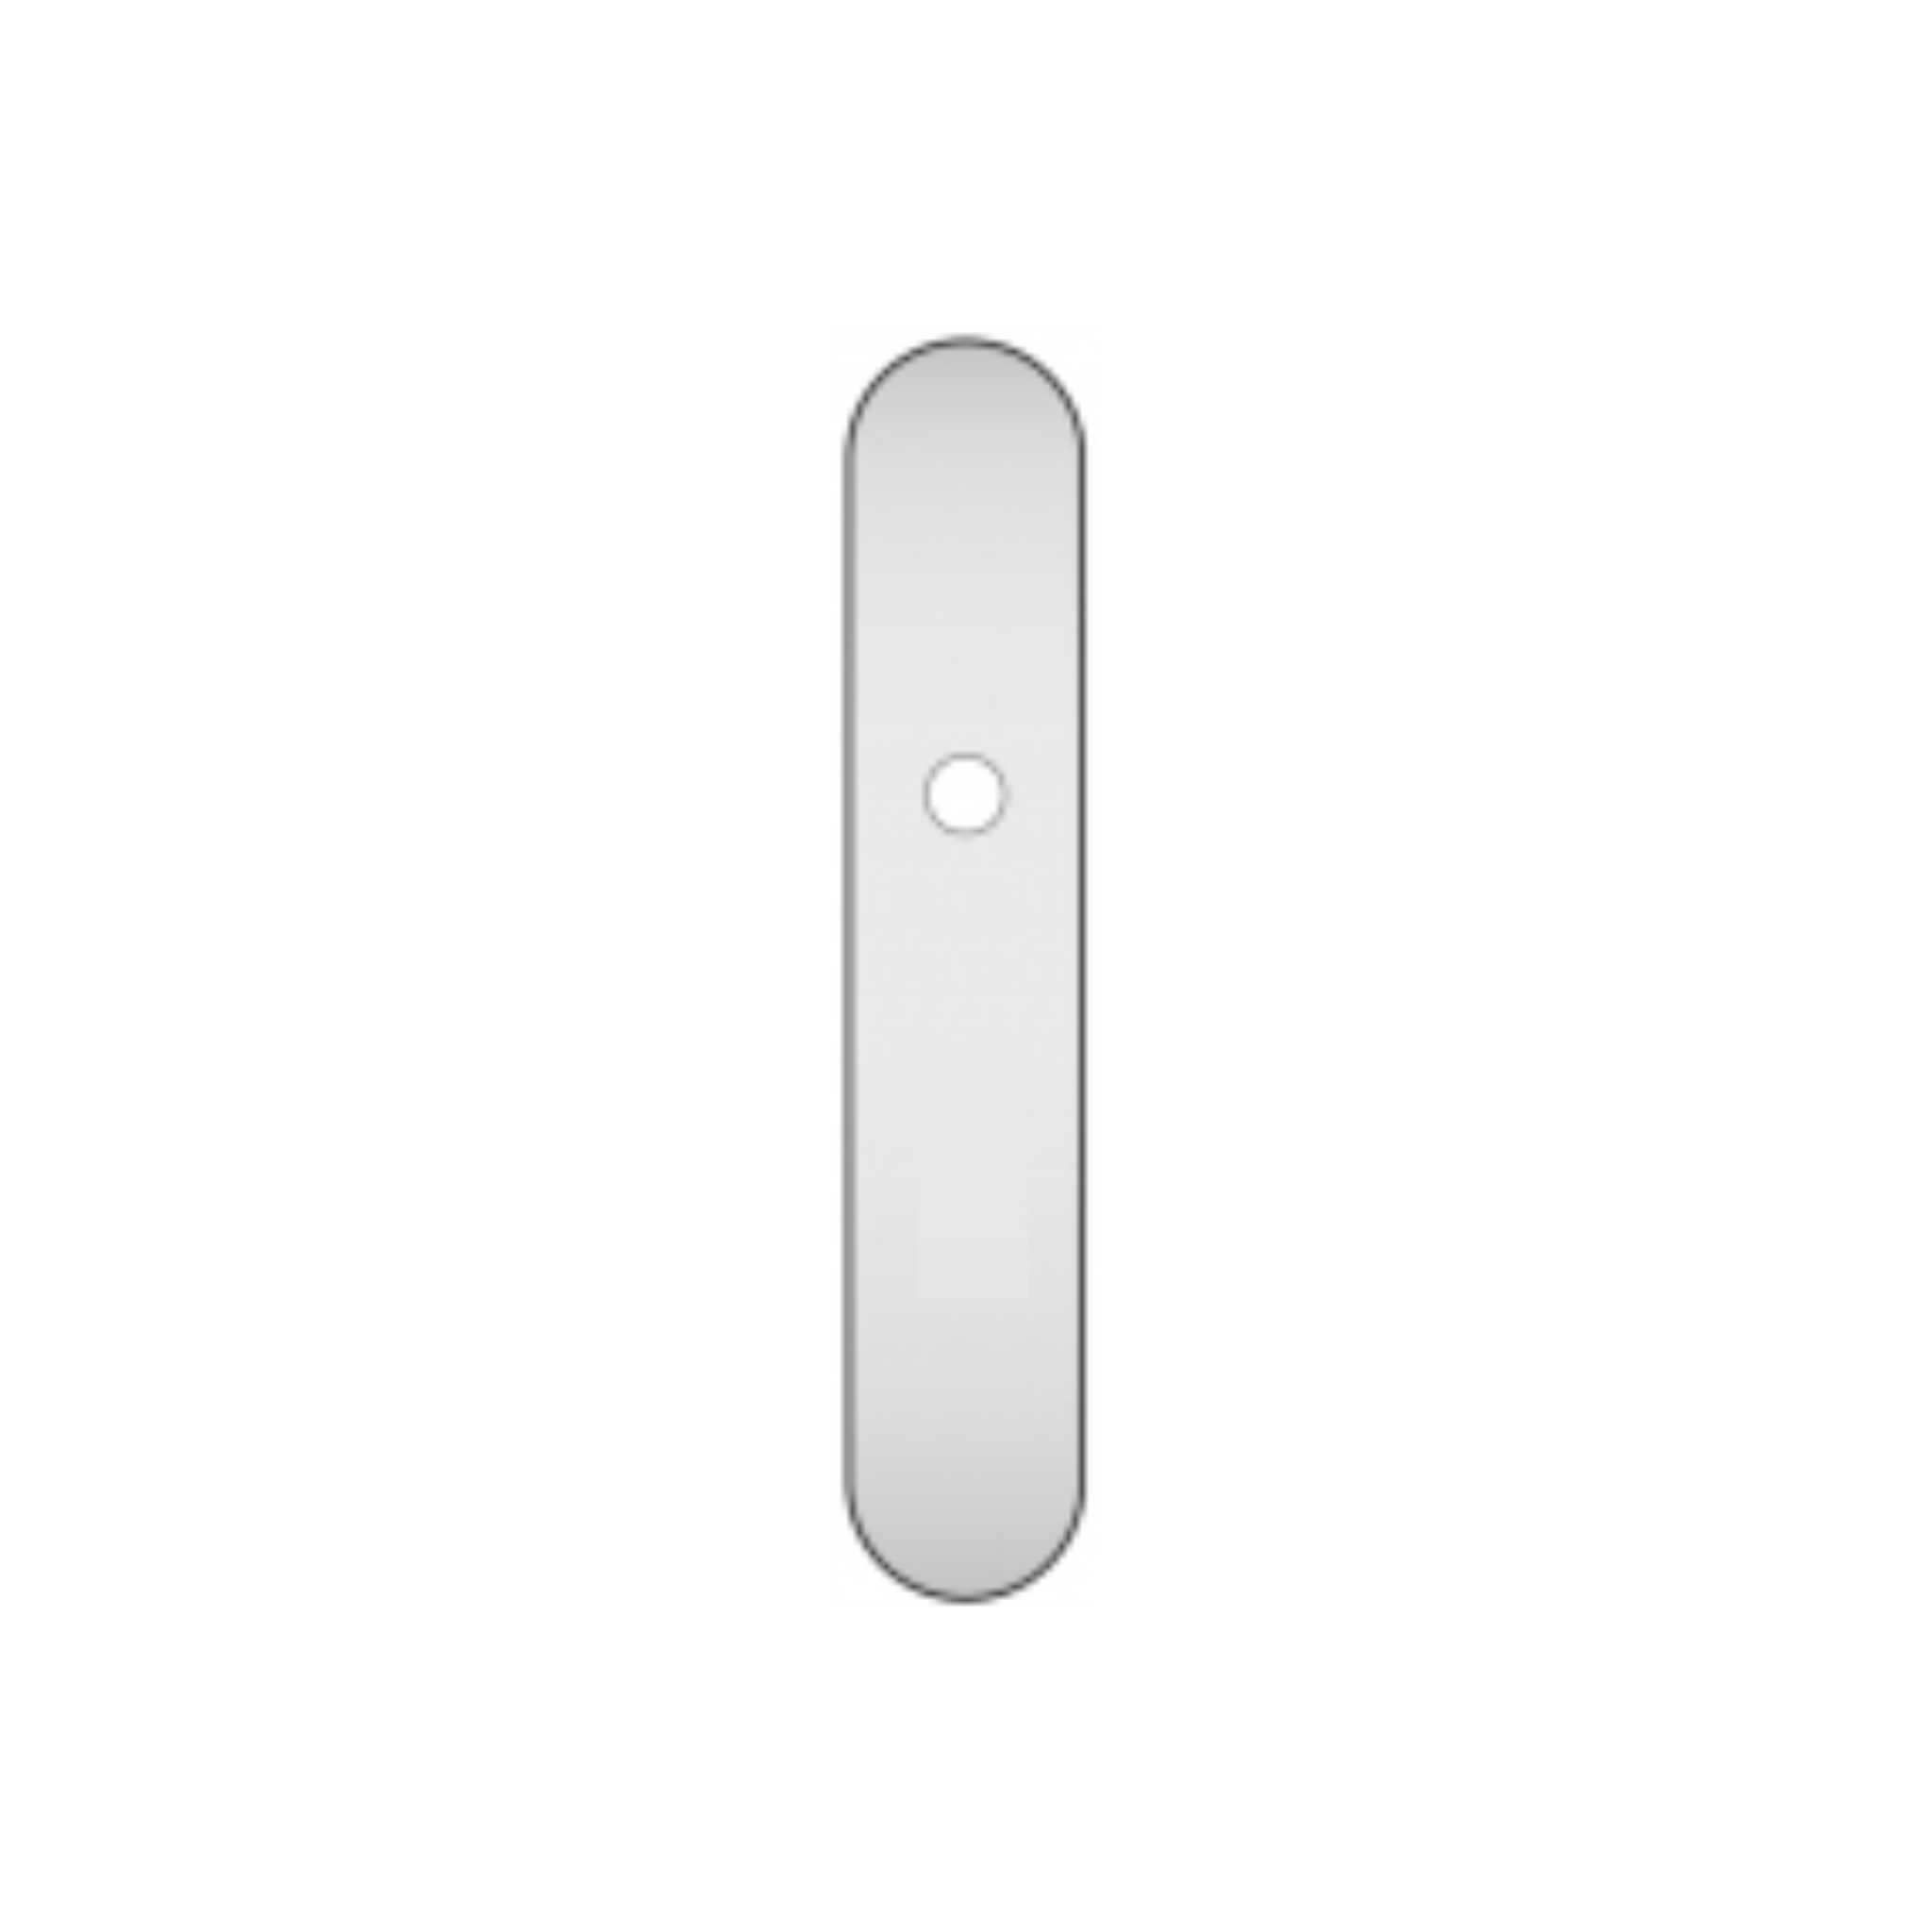 QS4484 BLANK, Plate, Oval, 245mm (l) x 45mm (w), Supplied without QS Handle, Stainless Steel, QS